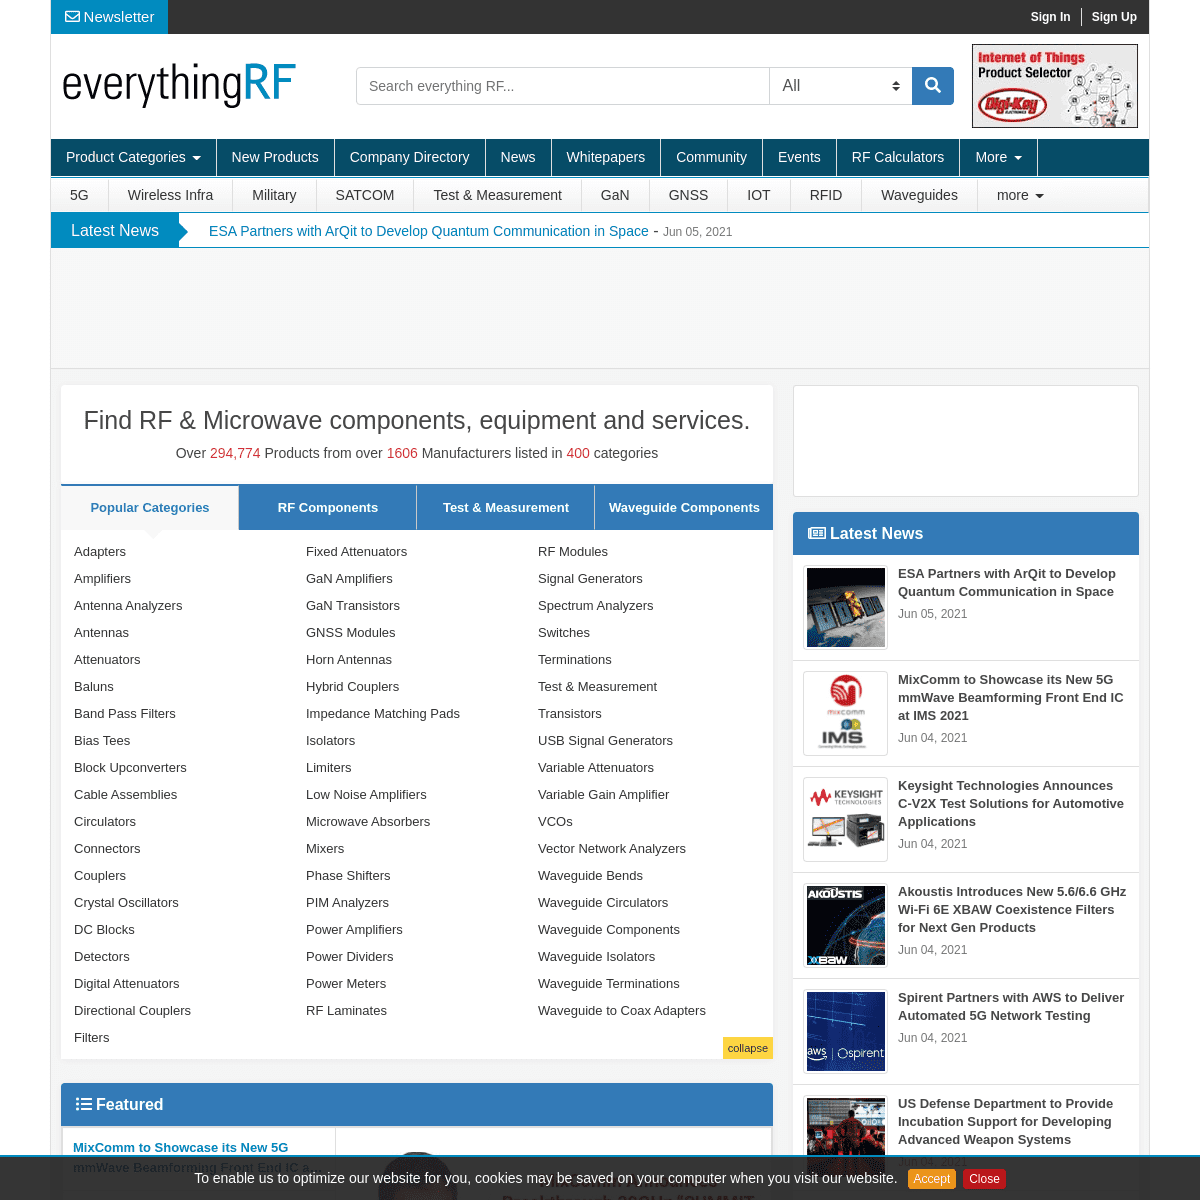 A complete backup of https://everythingrf.com